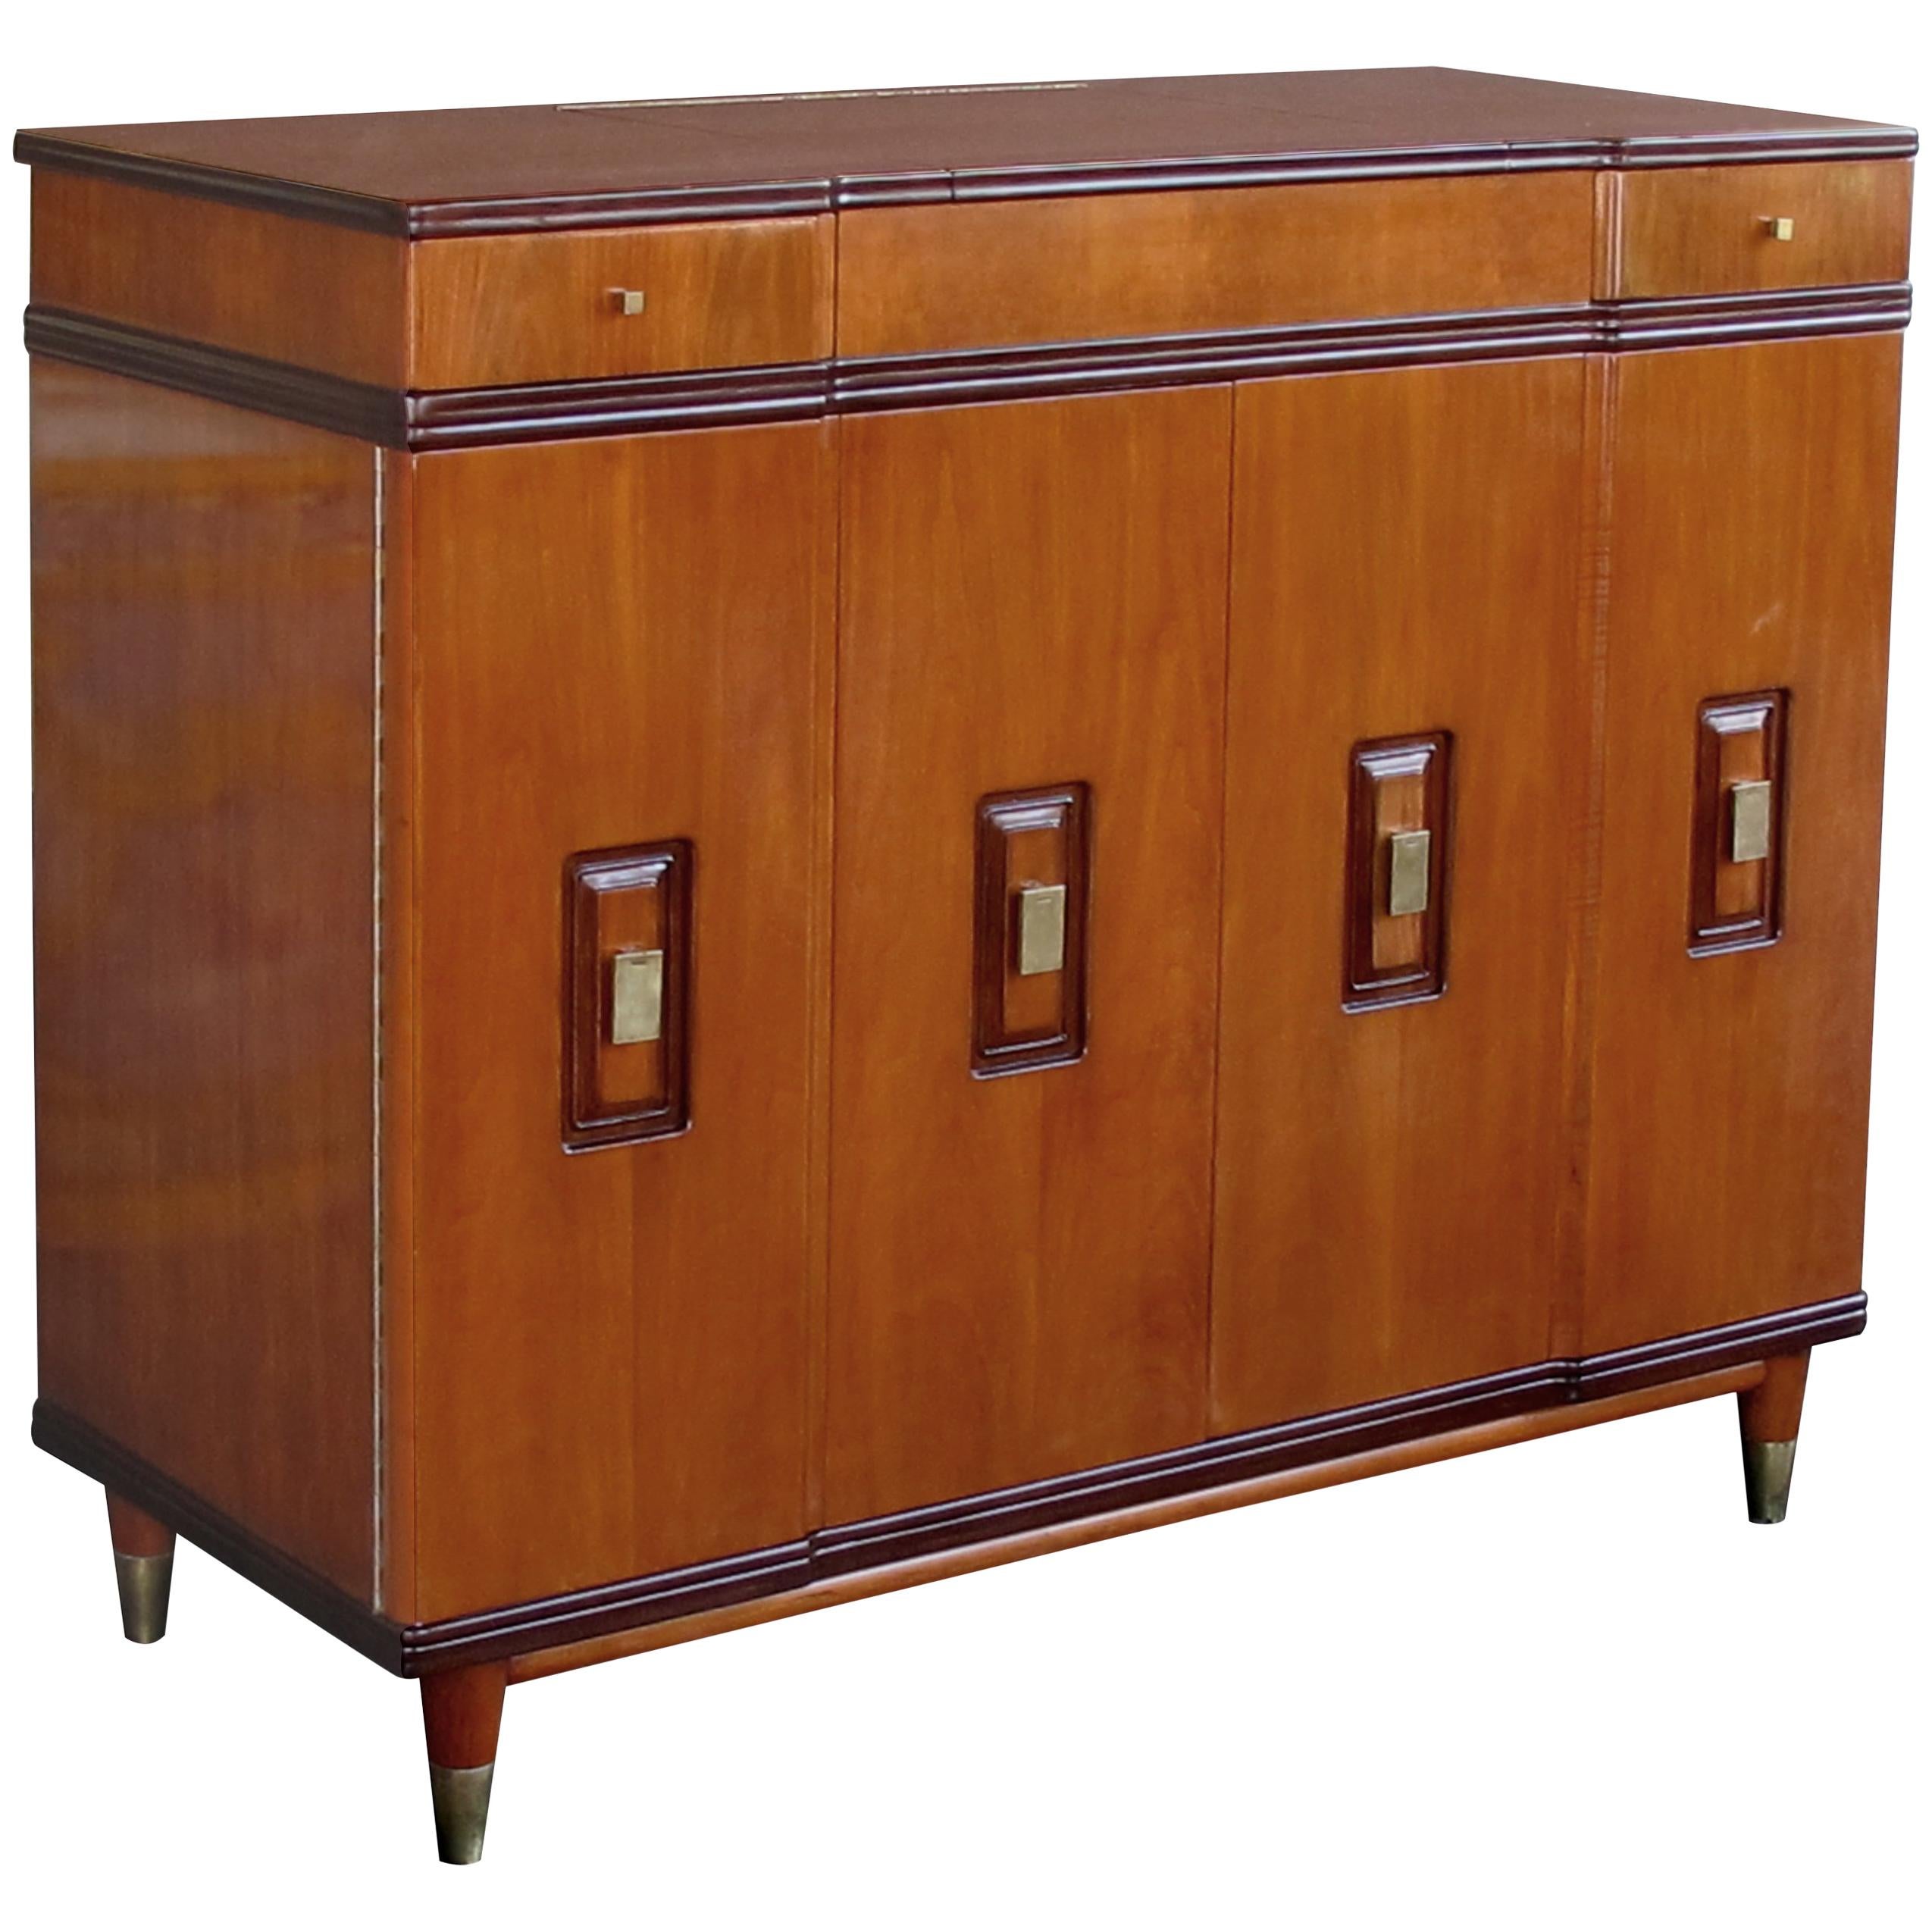 Handsome and Rare American Midcentury Walnut Dressing Cabinet by Widdicomb For Sale